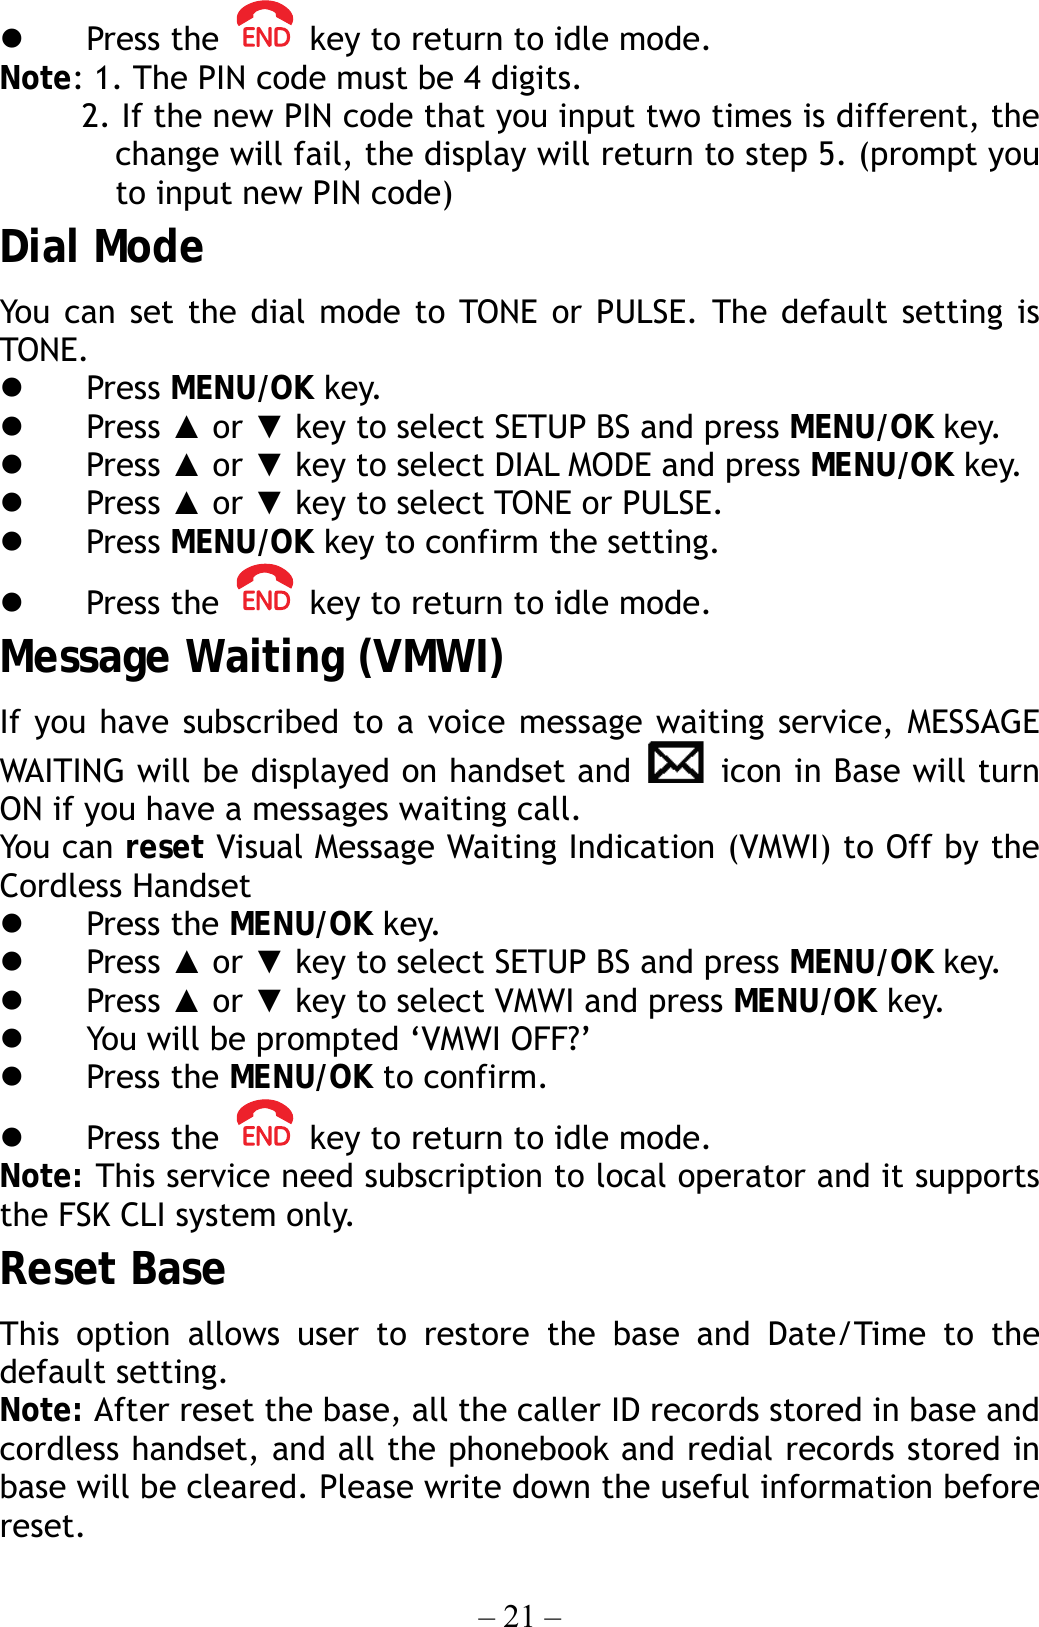 – 21 –   Press the    key to return to idle mode. Note: 1. The PIN code must be 4 digits.           2. If the new PIN code that you input two times is different, the change will fail, the display will return to step 5. (prompt you to input new PIN code) Dial Mode You can set the dial mode to TONE or PULSE. The default setting is TONE.   Press MENU/OK key.   Press ▲ or ▼ key to select SETUP BS and press MENU/OK key.   Press ▲ or ▼ key to select DIAL MODE and press MENU/OK key.   Press ▲ or ▼ key to select TONE or PULSE.   Press MENU/OK key to confirm the setting.   Press the    key to return to idle mode. Message Waiting (VMWI) If you have subscribed to a voice message waiting service, MESSAGE WAITING will be displayed on handset and   icon in Base will turn ON if you have a messages waiting call. You can reset Visual Message Waiting Indication (VMWI) to Off by the Cordless Handset   Press the MENU/OK key.     Press ▲ or ▼ key to select SETUP BS and press MENU/OK key.   Press ▲ or ▼ key to select VMWI and press MENU/OK key.   You will be prompted ‘VMWI OFF?’     Press the MENU/OK to confirm.   Press the    key to return to idle mode. Note: This service need subscription to local operator and it supports the FSK CLI system only. Reset Base This option allows user to restore the base and Date/Time to the default setting. Note: After reset the base, all the caller ID records stored in base and cordless handset, and all the phonebook and redial records stored in base will be cleared. Please write down the useful information before reset. 